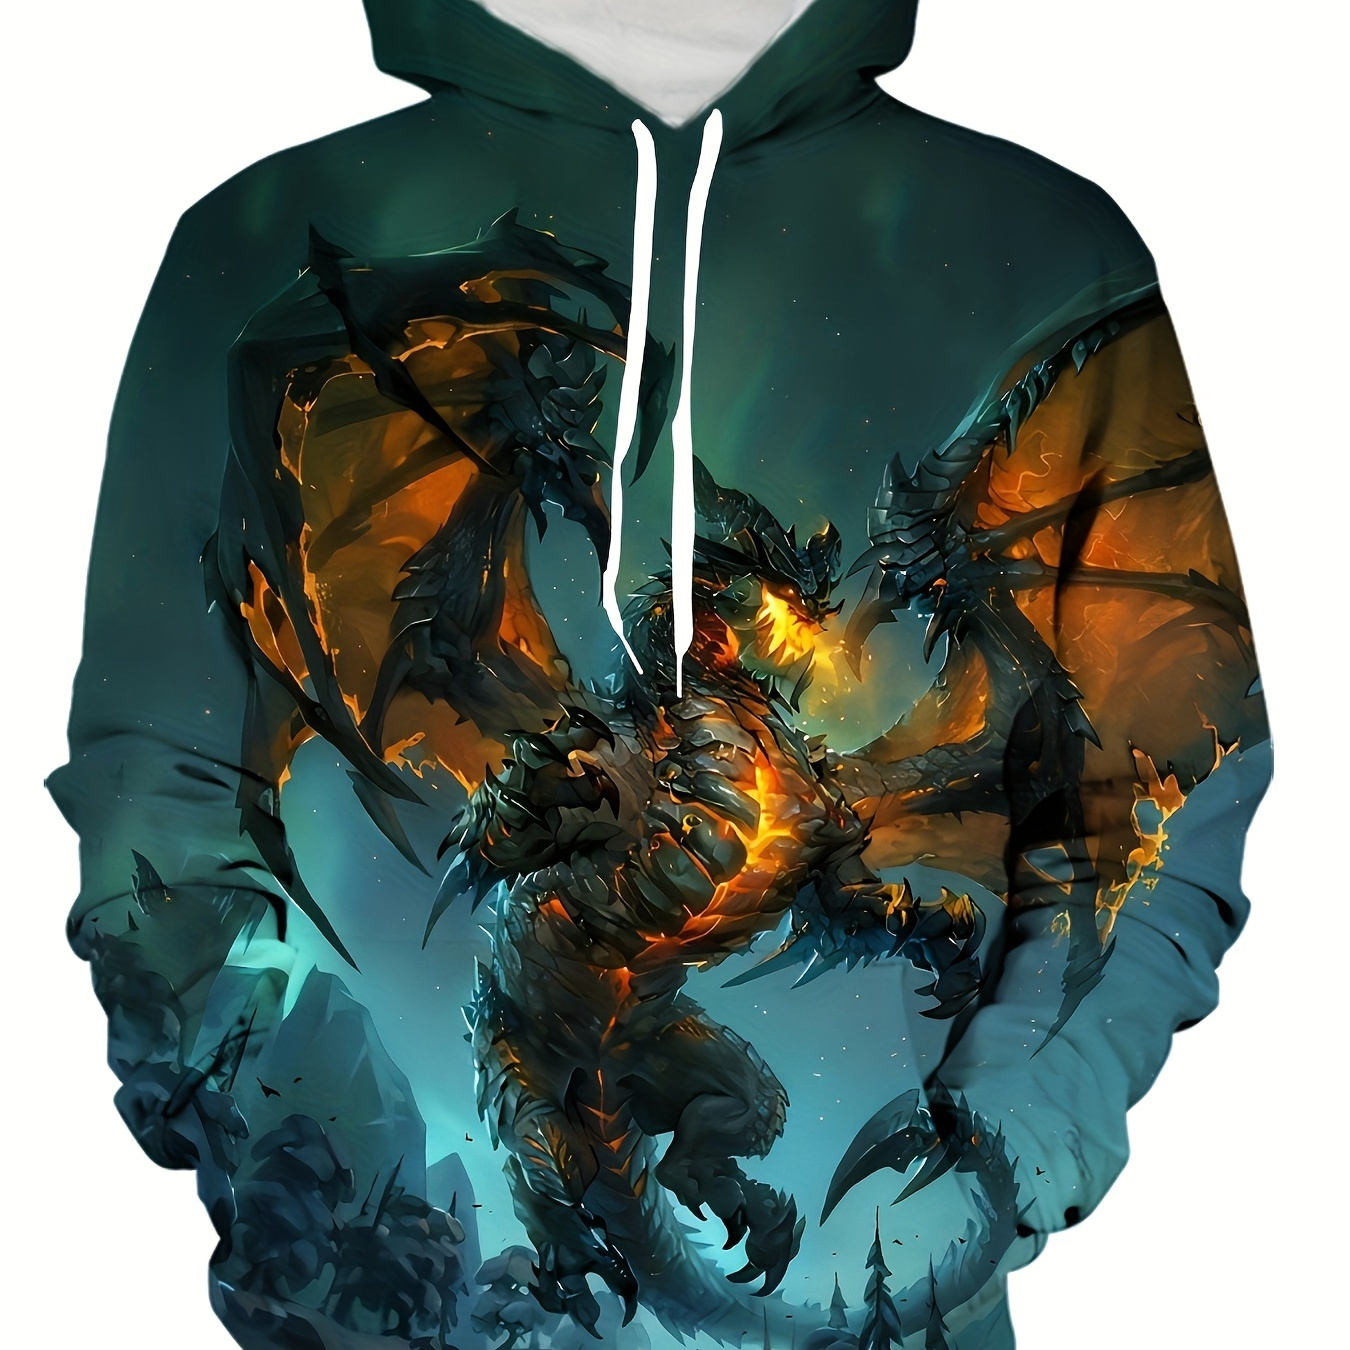 

3d Dragon Print Hoodie, Cool Hoodies For Men, Men's Casual Graphic Design Pullover Hooded Sweatshirt With Kangaroo Pocket Streetwear For Winter Fall, As Gifts